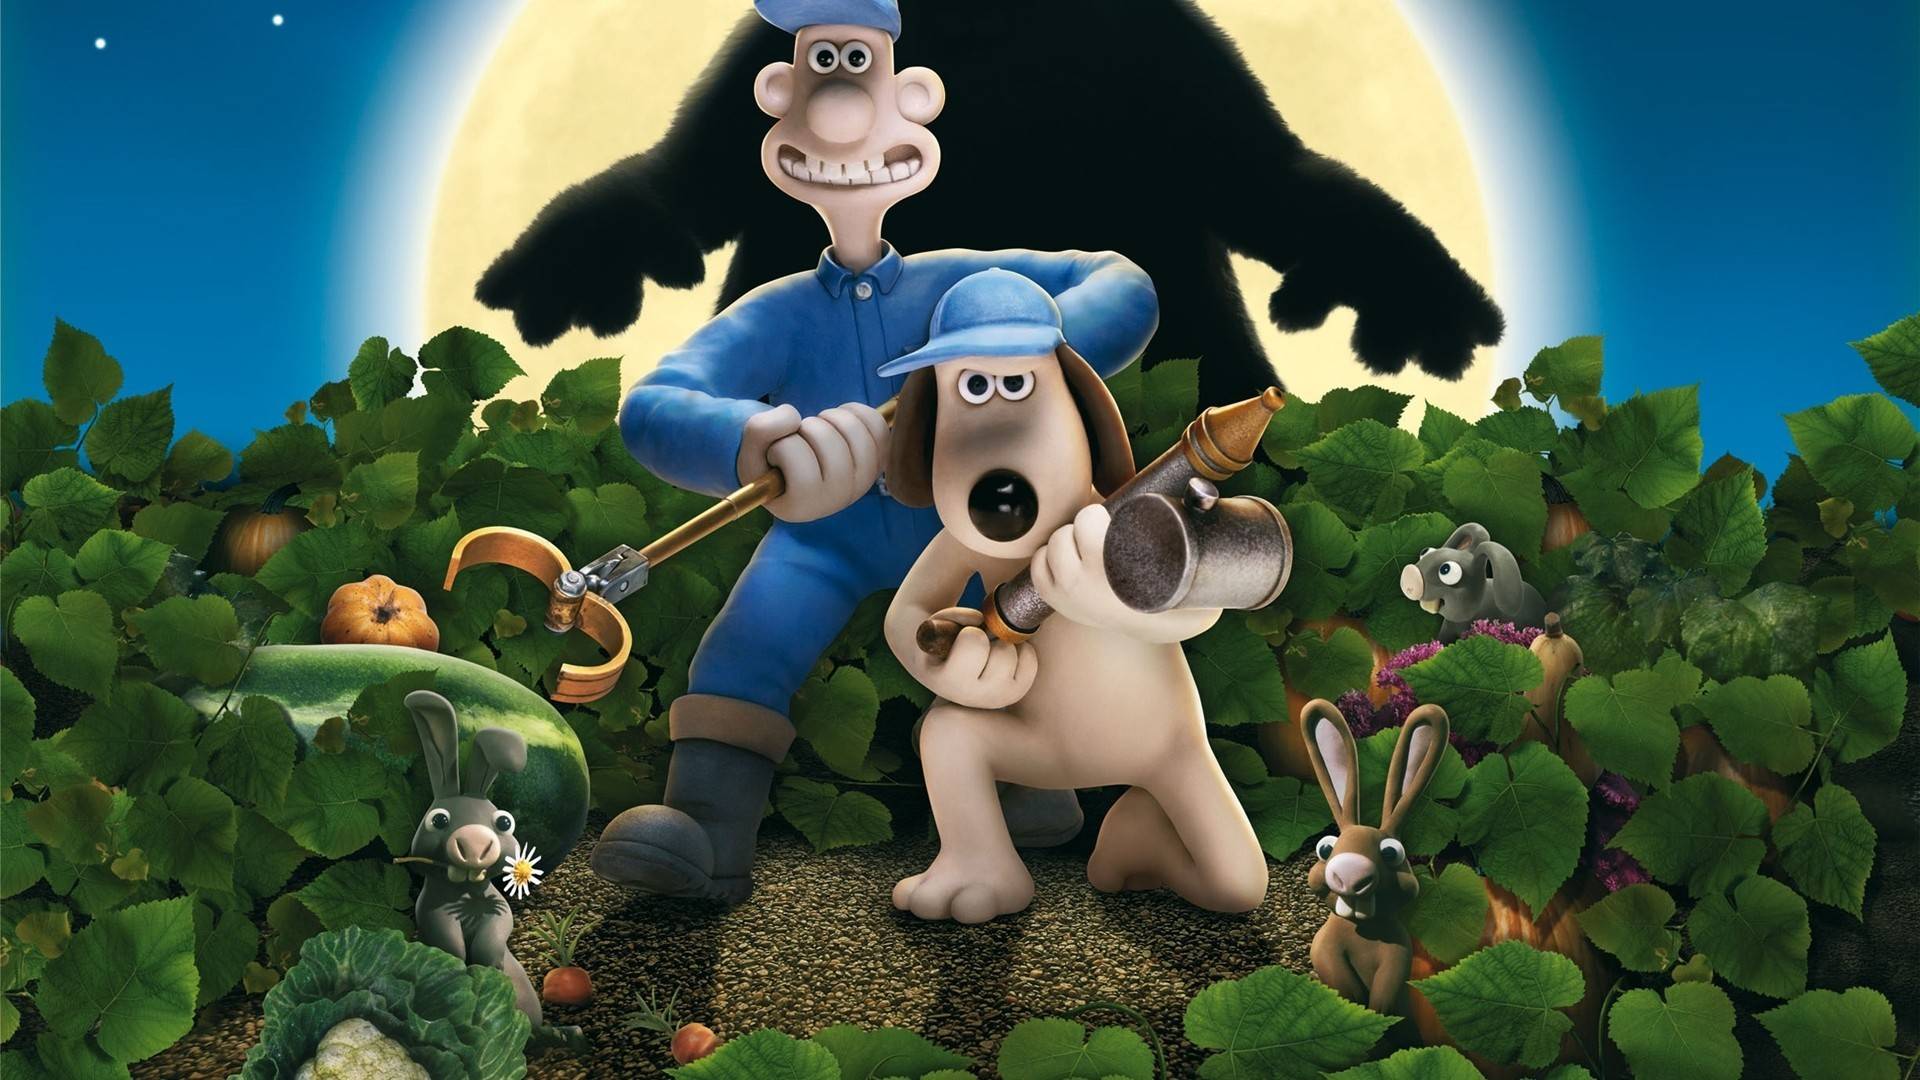 Wallace And Gromit The Curse Of Were Rabbit Wallpaper Jpg